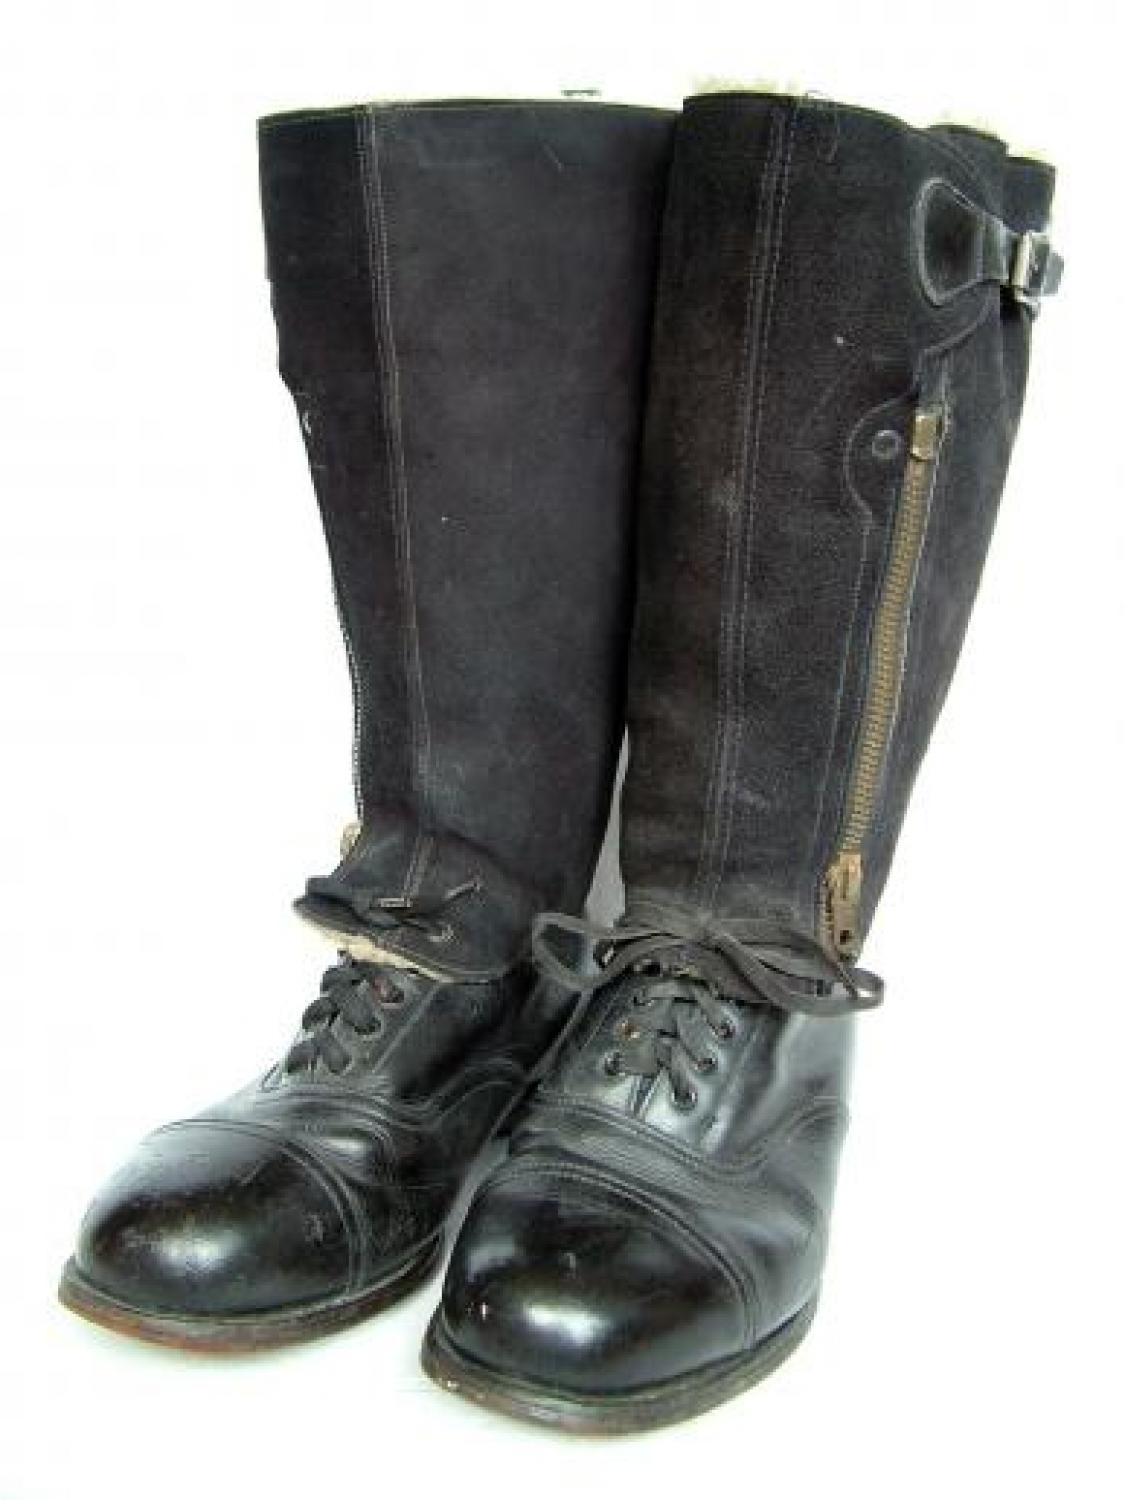 RAF 1943 Pattern 'Escape' Flying Boots